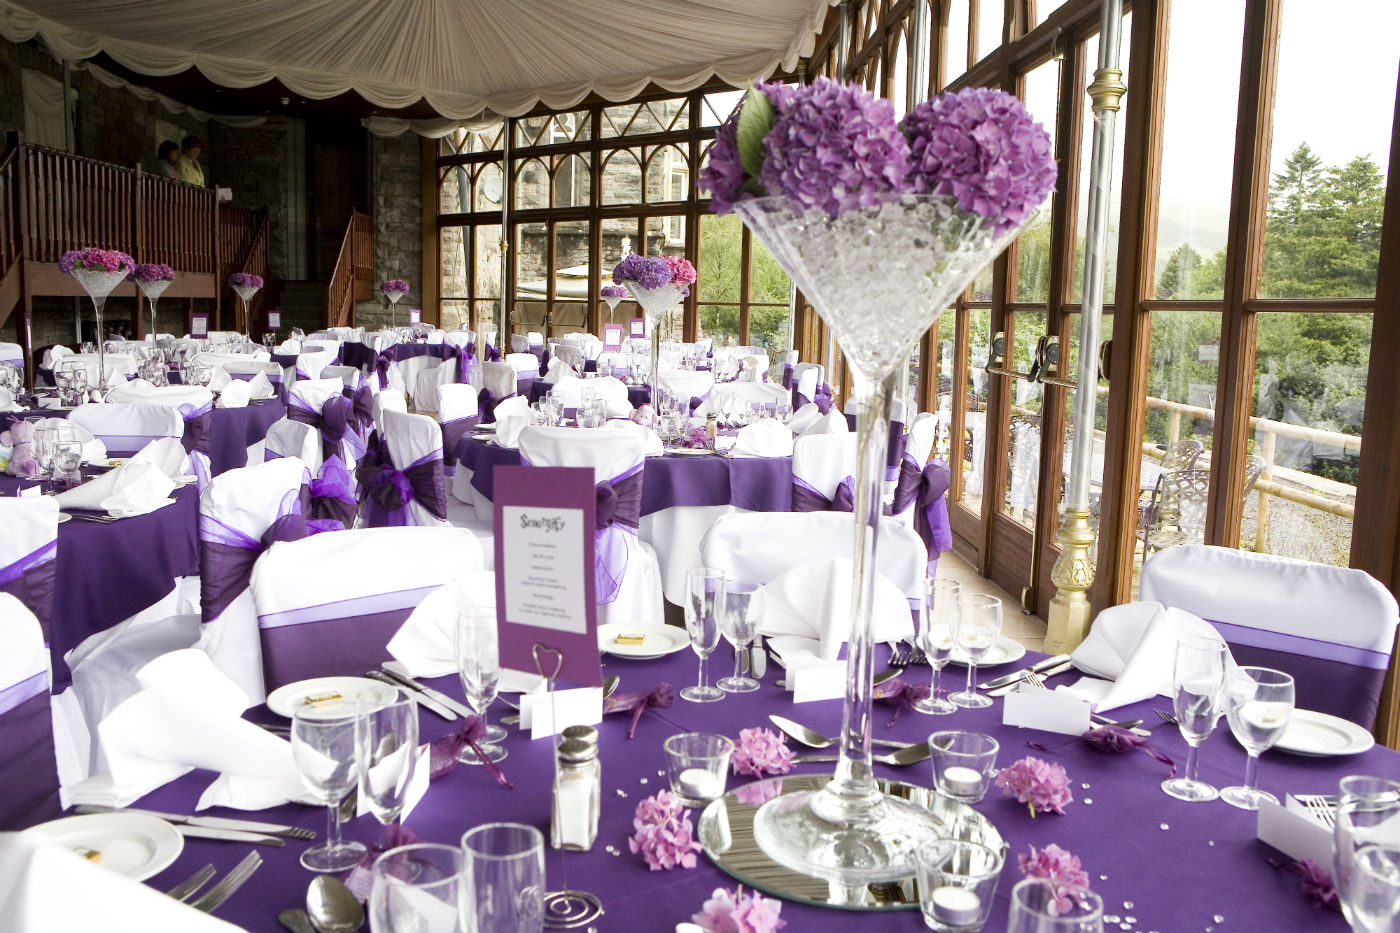 5 Tips for Choosing Your Perfect Wedding Reception Venue - Tech Publish Now